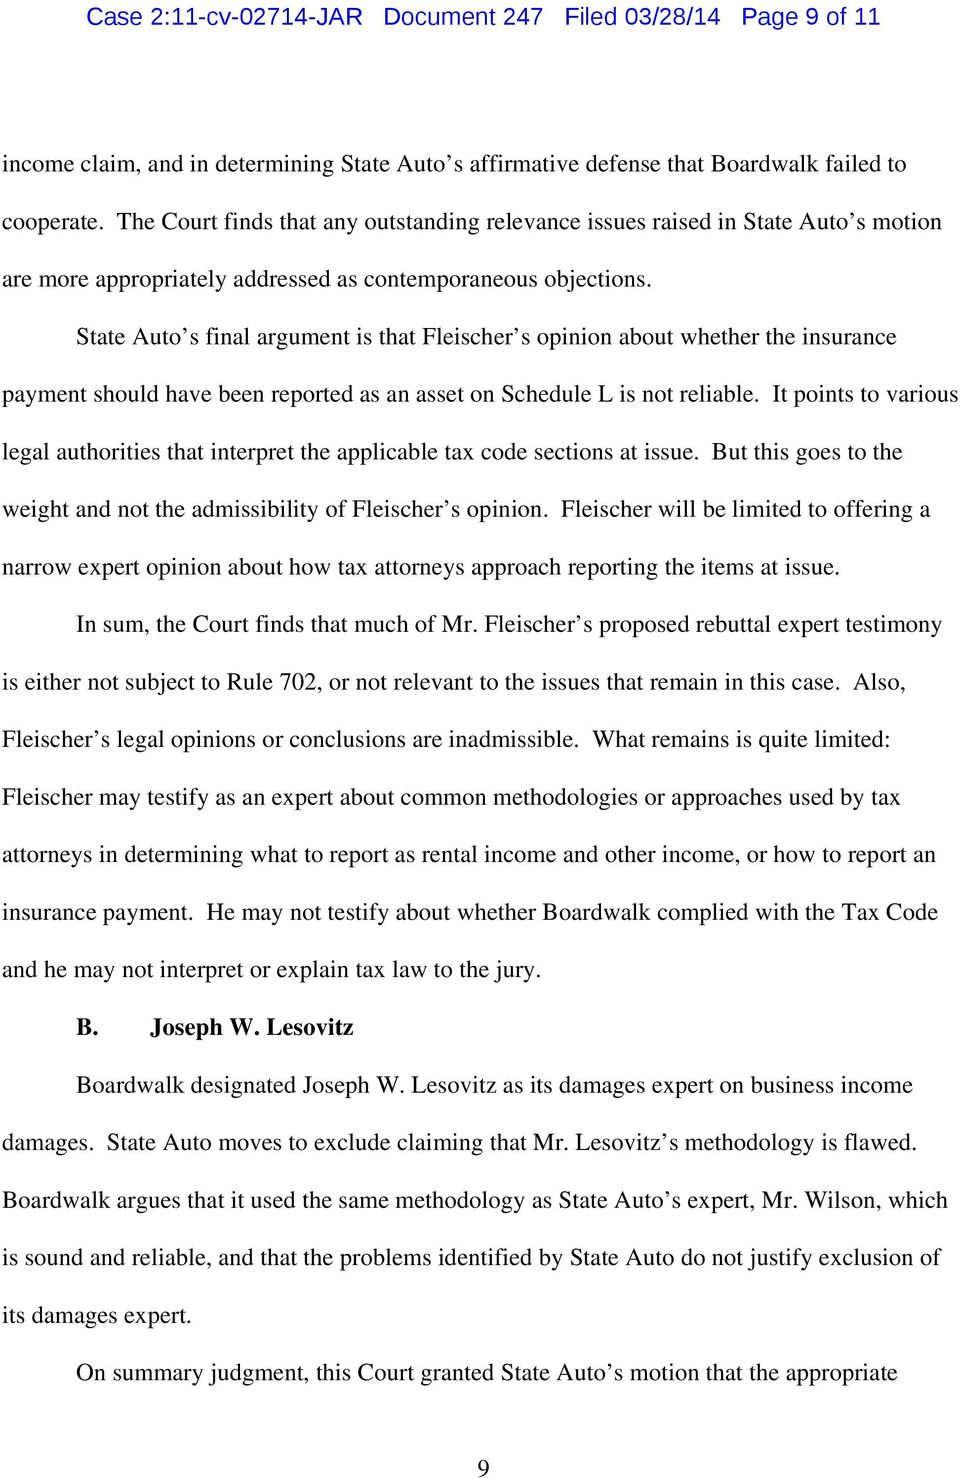 State Auto s final argument is that Fleischer s opinion about whether the insurance payment should have been reported as an asset on Schedule L is not reliable.